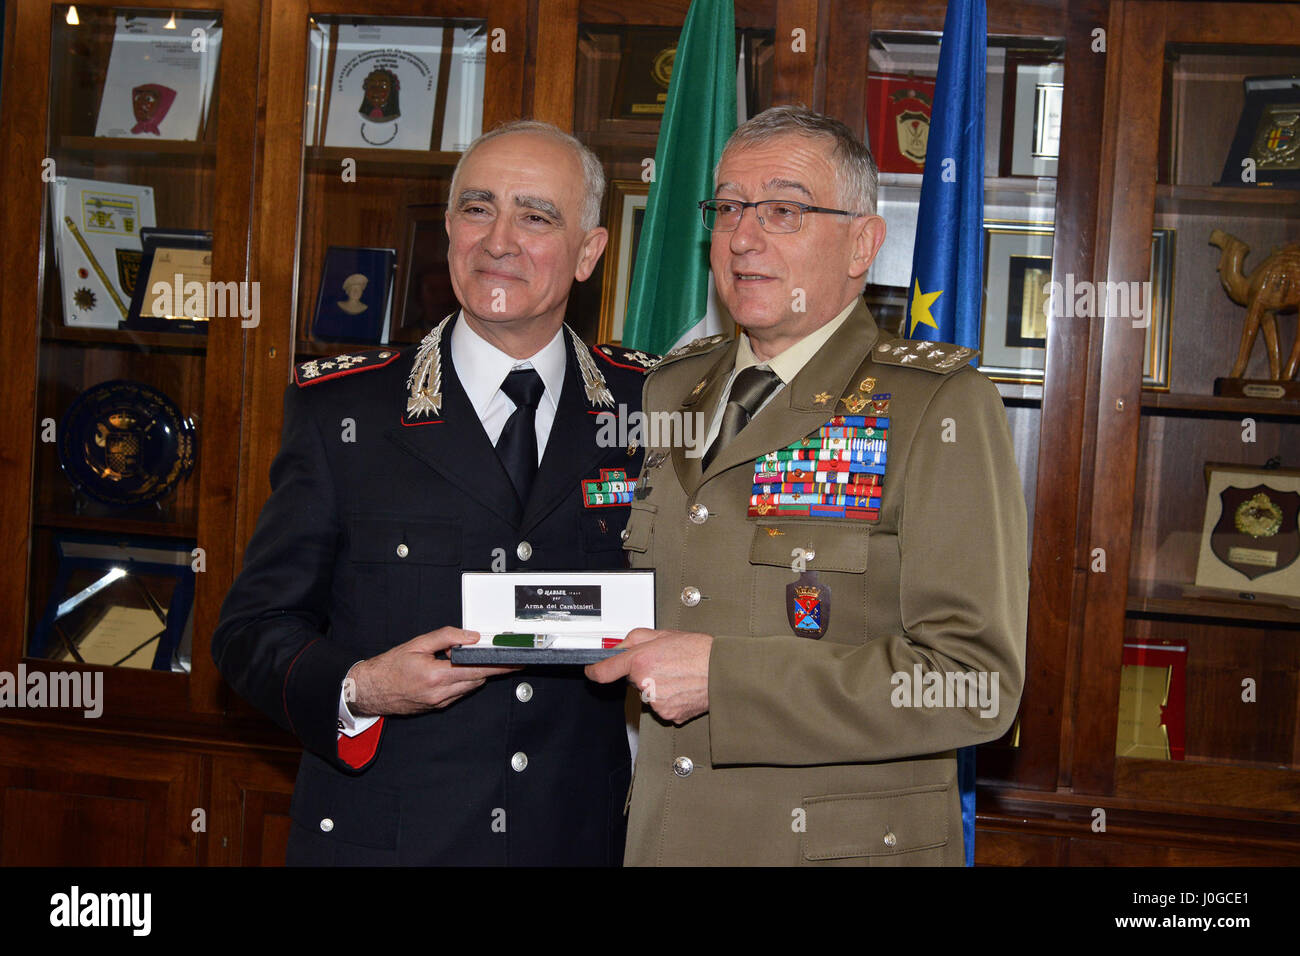 Gen. Tullio Del Sette, Italian Carabinieri General Commander (left), presents Carabinieri gift to Gen. Claudio Graziano, Italian Army Chief of Staff (right), during visit at Center of Excellence for Stability Police Units (CoESPU) Vicenza, Italy, April 1, 2017. (U.S. Army Photo by Visual Information Specialist Paolo Bovo/released) Stock Photo